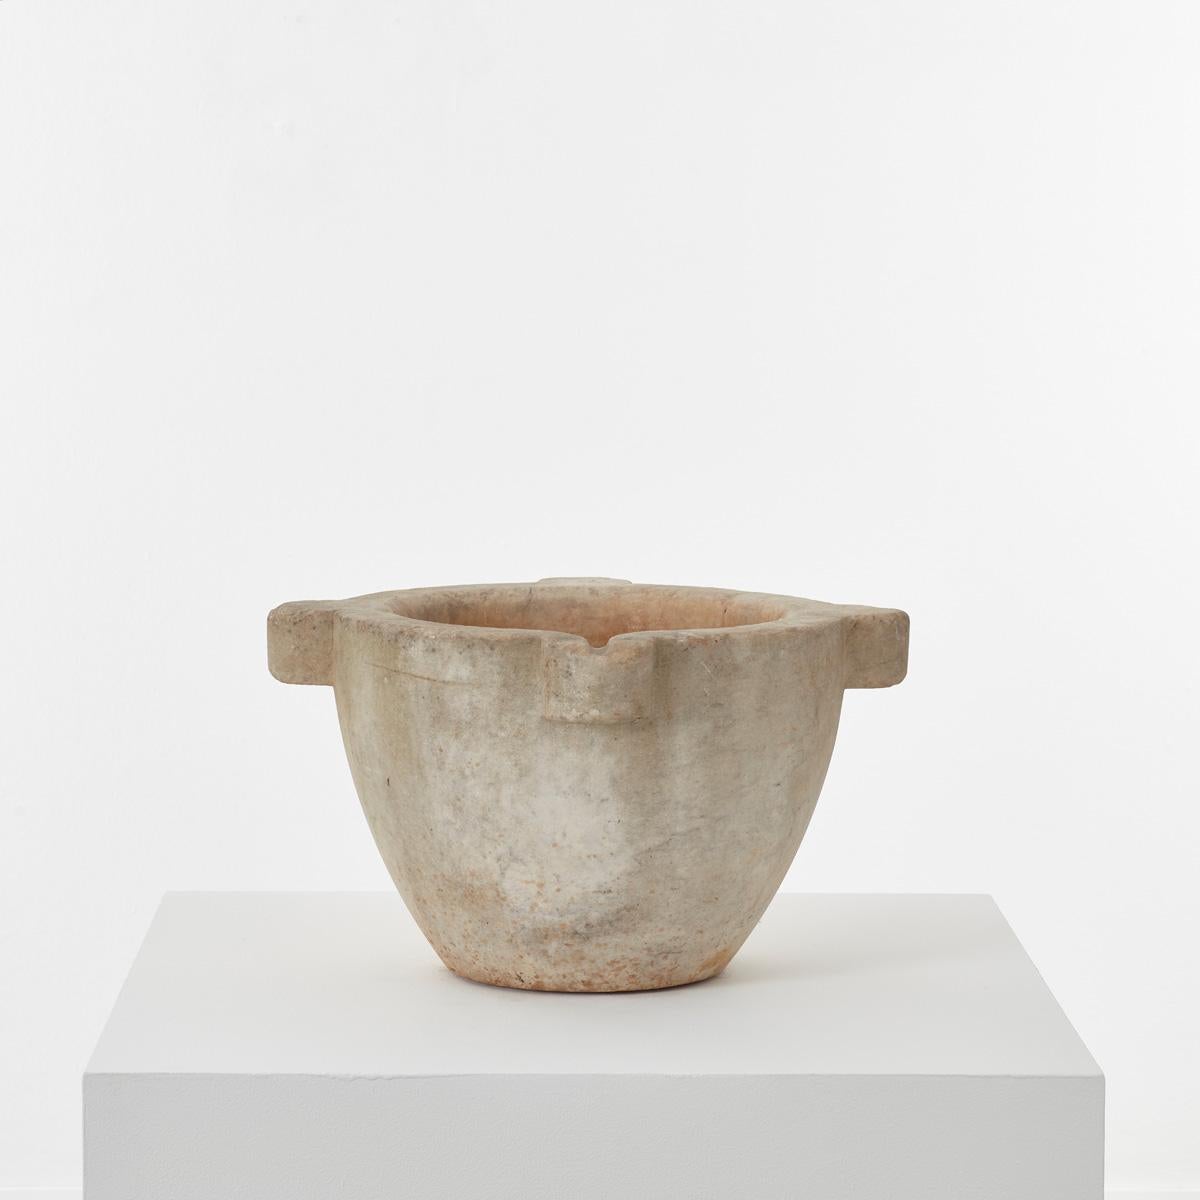 This 19th century marble mortar has a rather mysterious aura about it. It is hand-sculpted from a single piece of stone, with beautiful ageing over time. Perhaps the most distinctive element of this piece is the chisel marks apparent on close